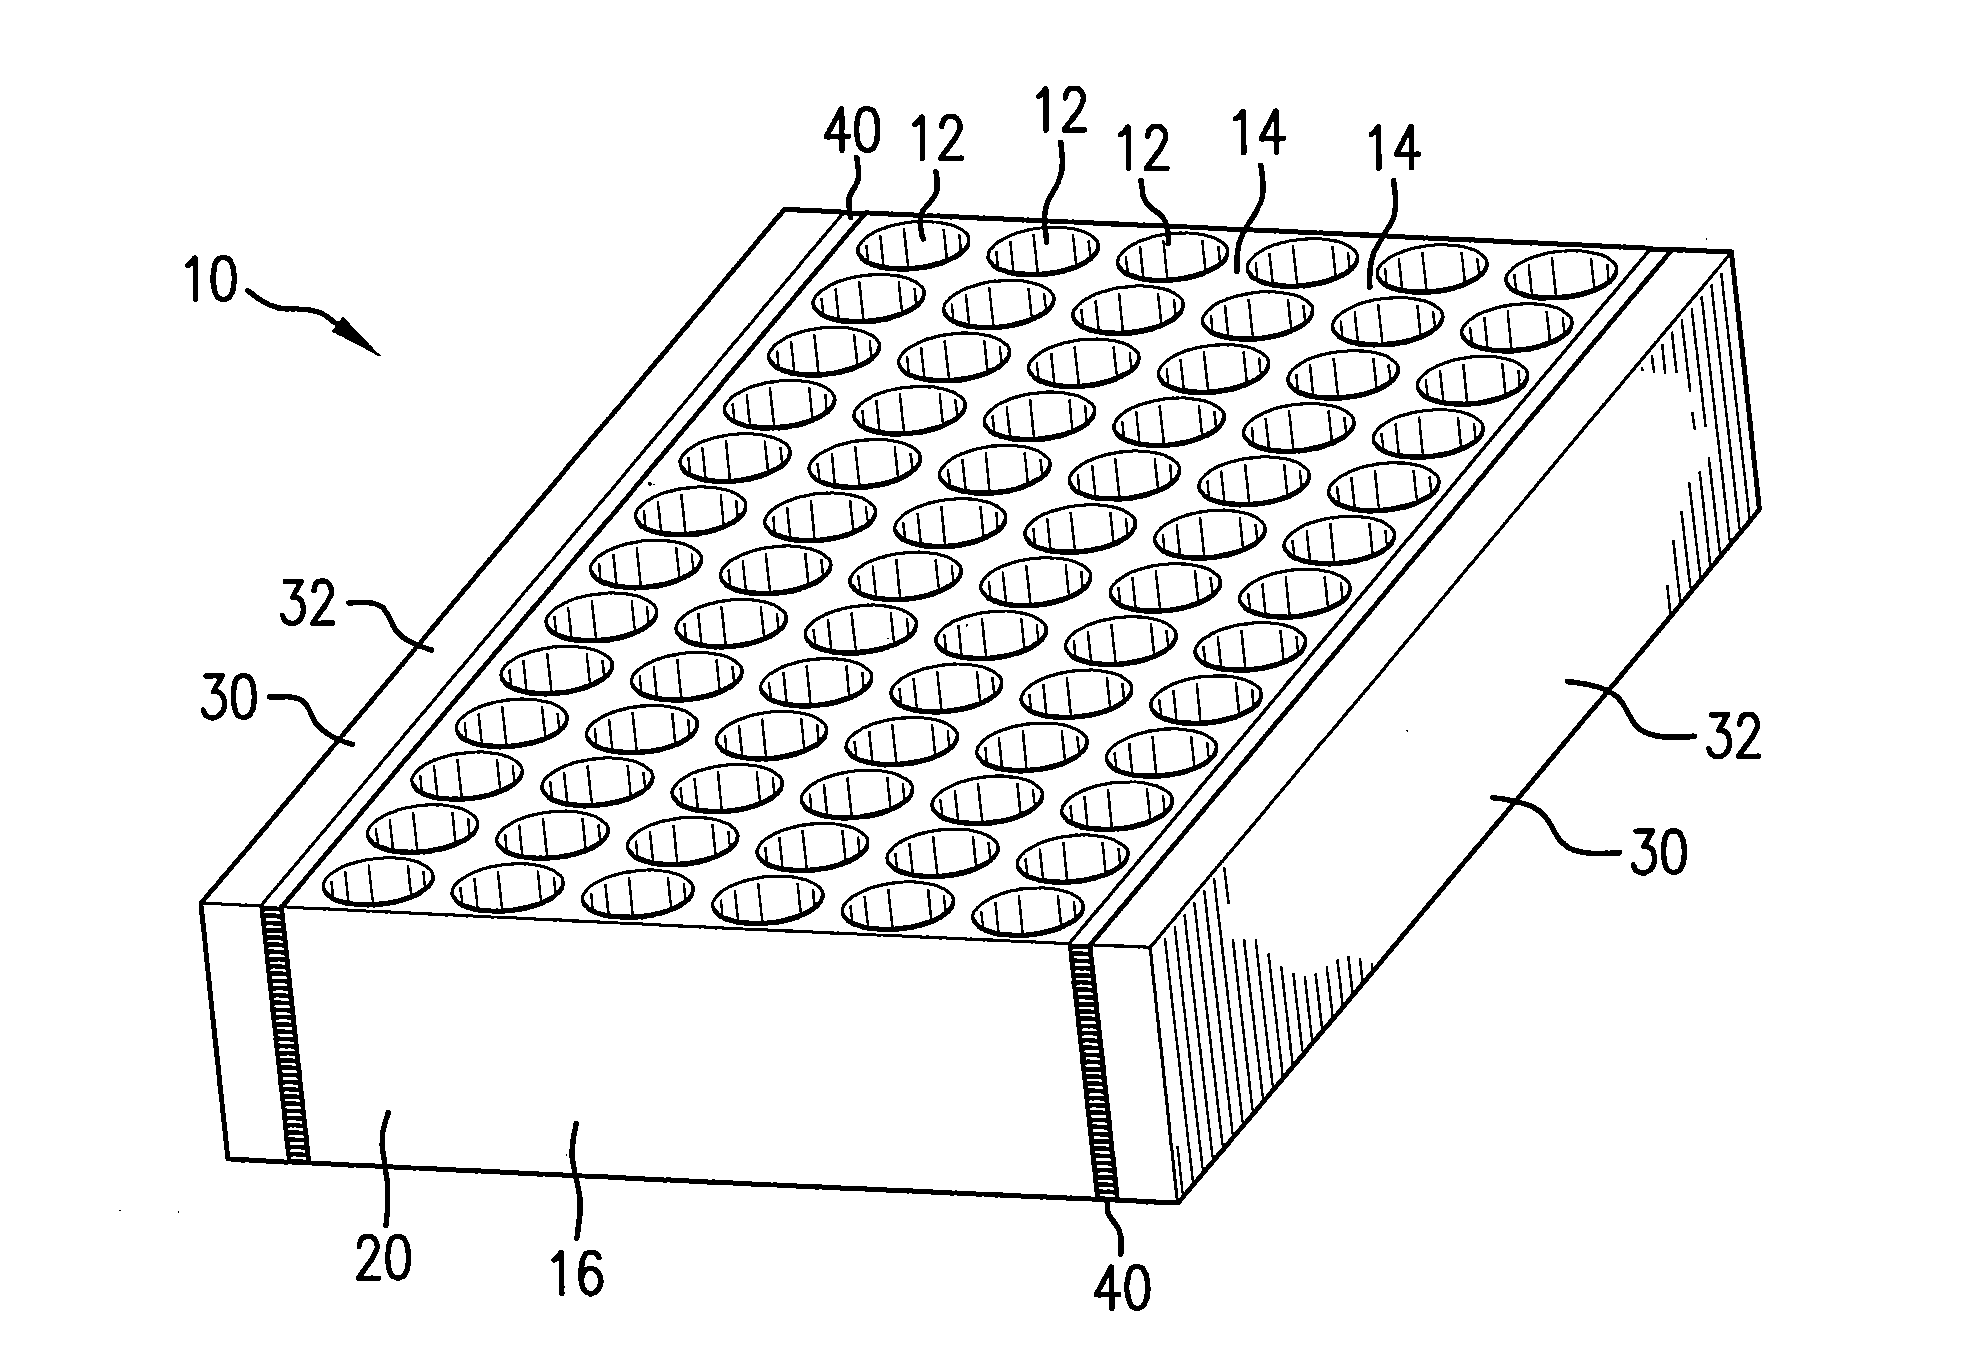 Energy storage thermal management system using multi-temperature phase change materials